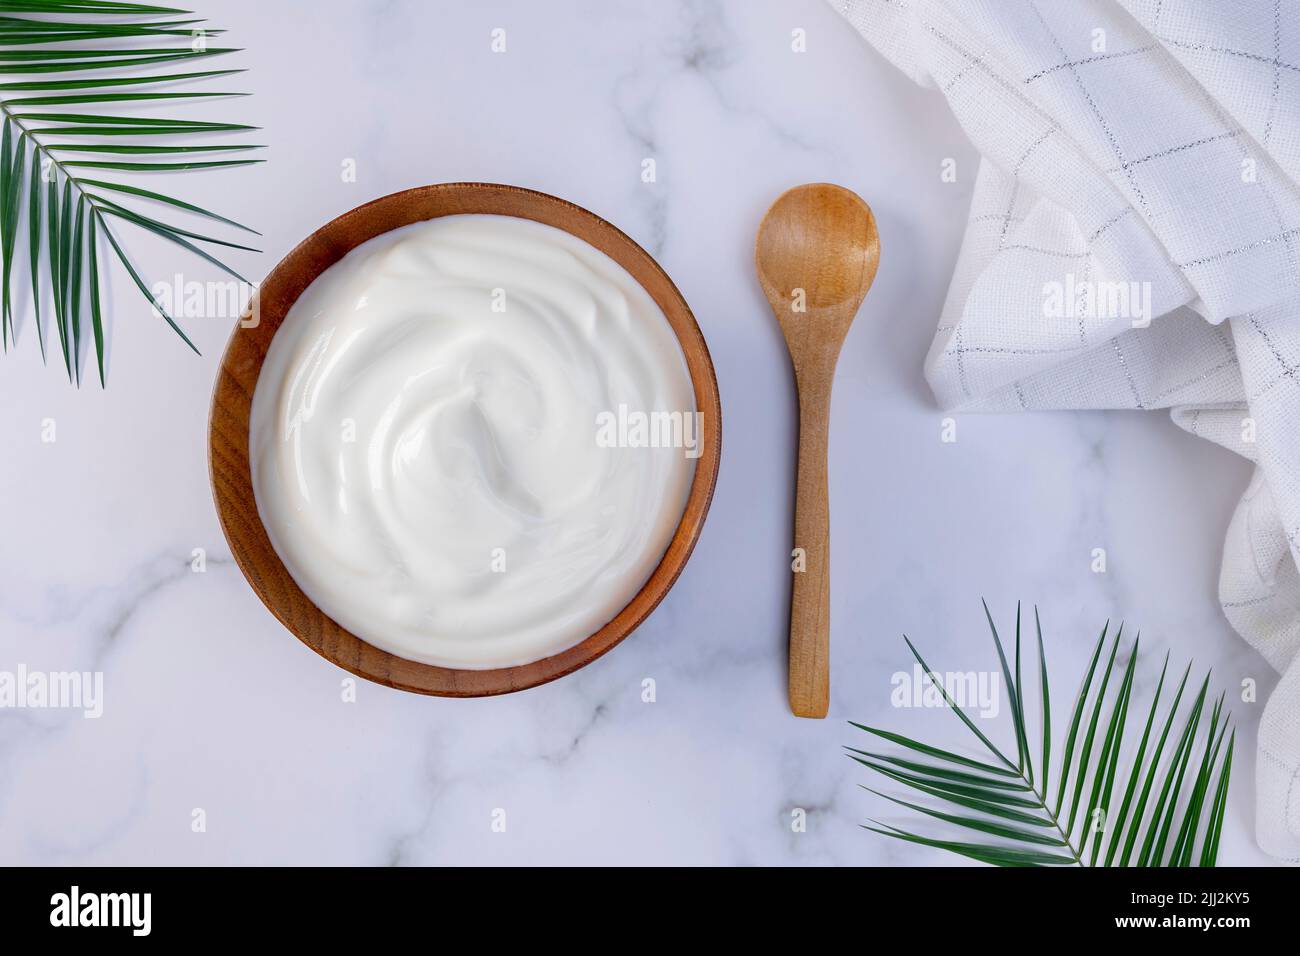 A portion of Greek yogurt in a wooden bowl ready to be served. Healthy food for dieting concept. Stock Photo